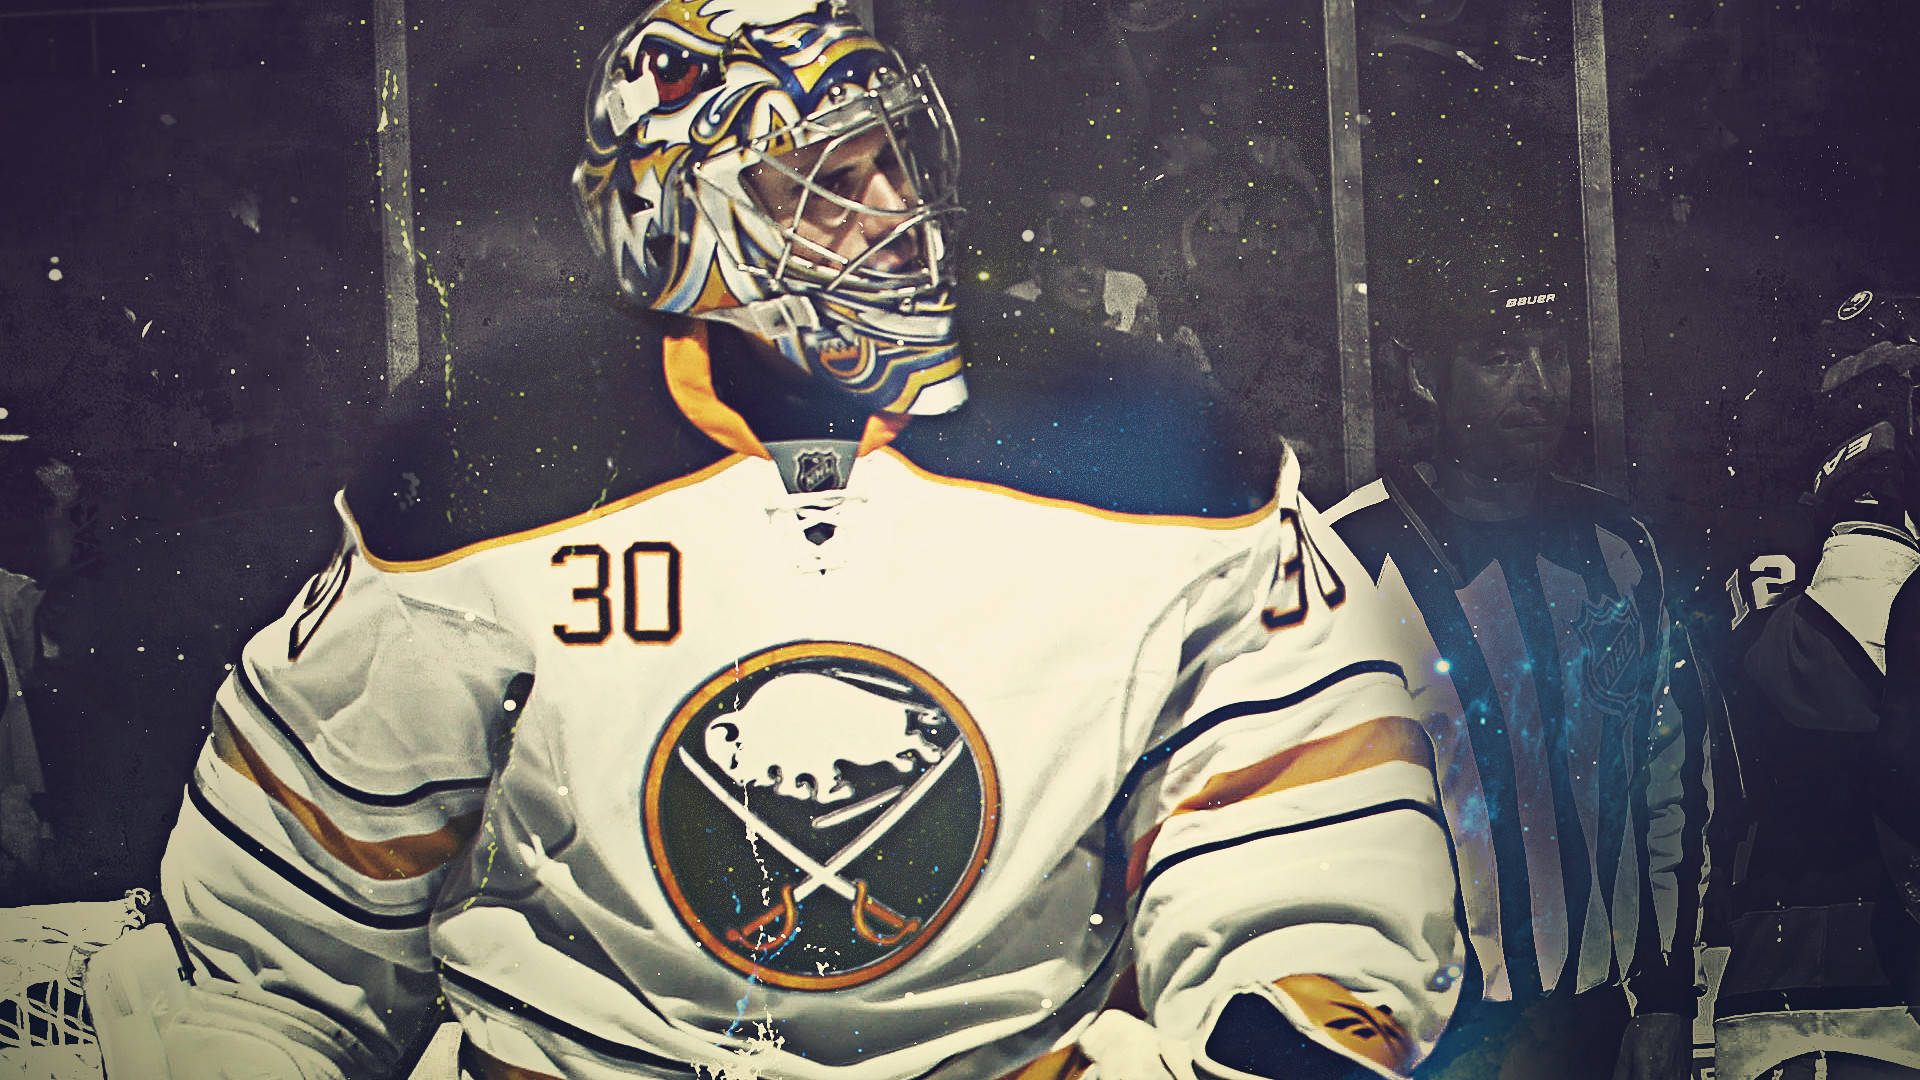 Caption: Buffalo Sabres Star Player, Ryan Miller In Action On The Ice. Background